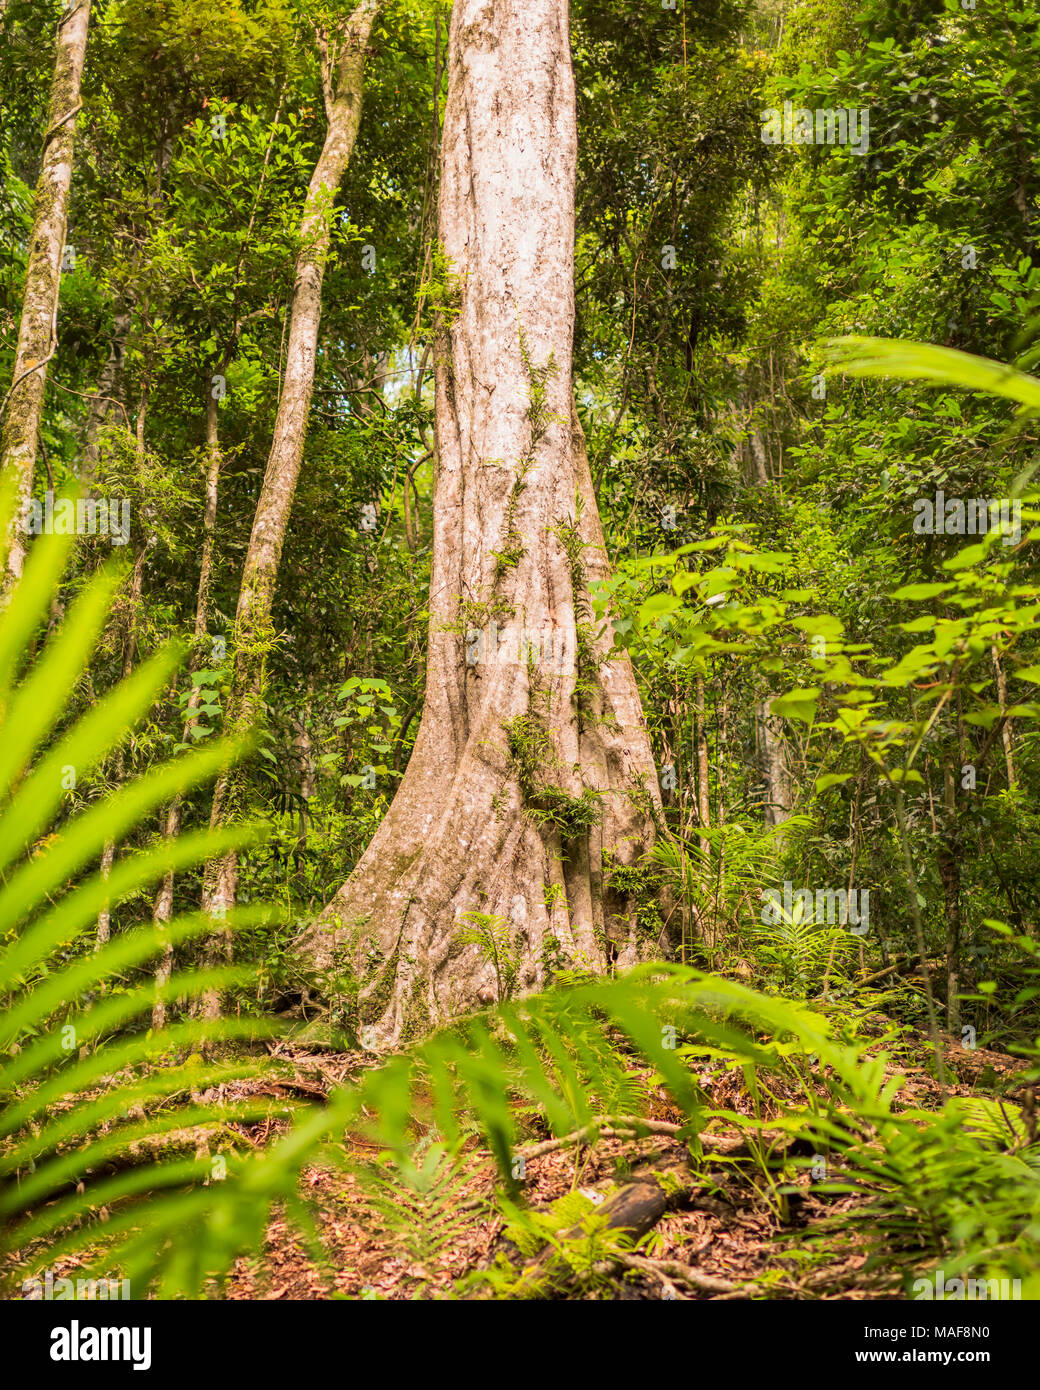 Maiala hiking area in the D'aguilar State Forest near Mount Glorious, Queensland, Australia Stock Photo